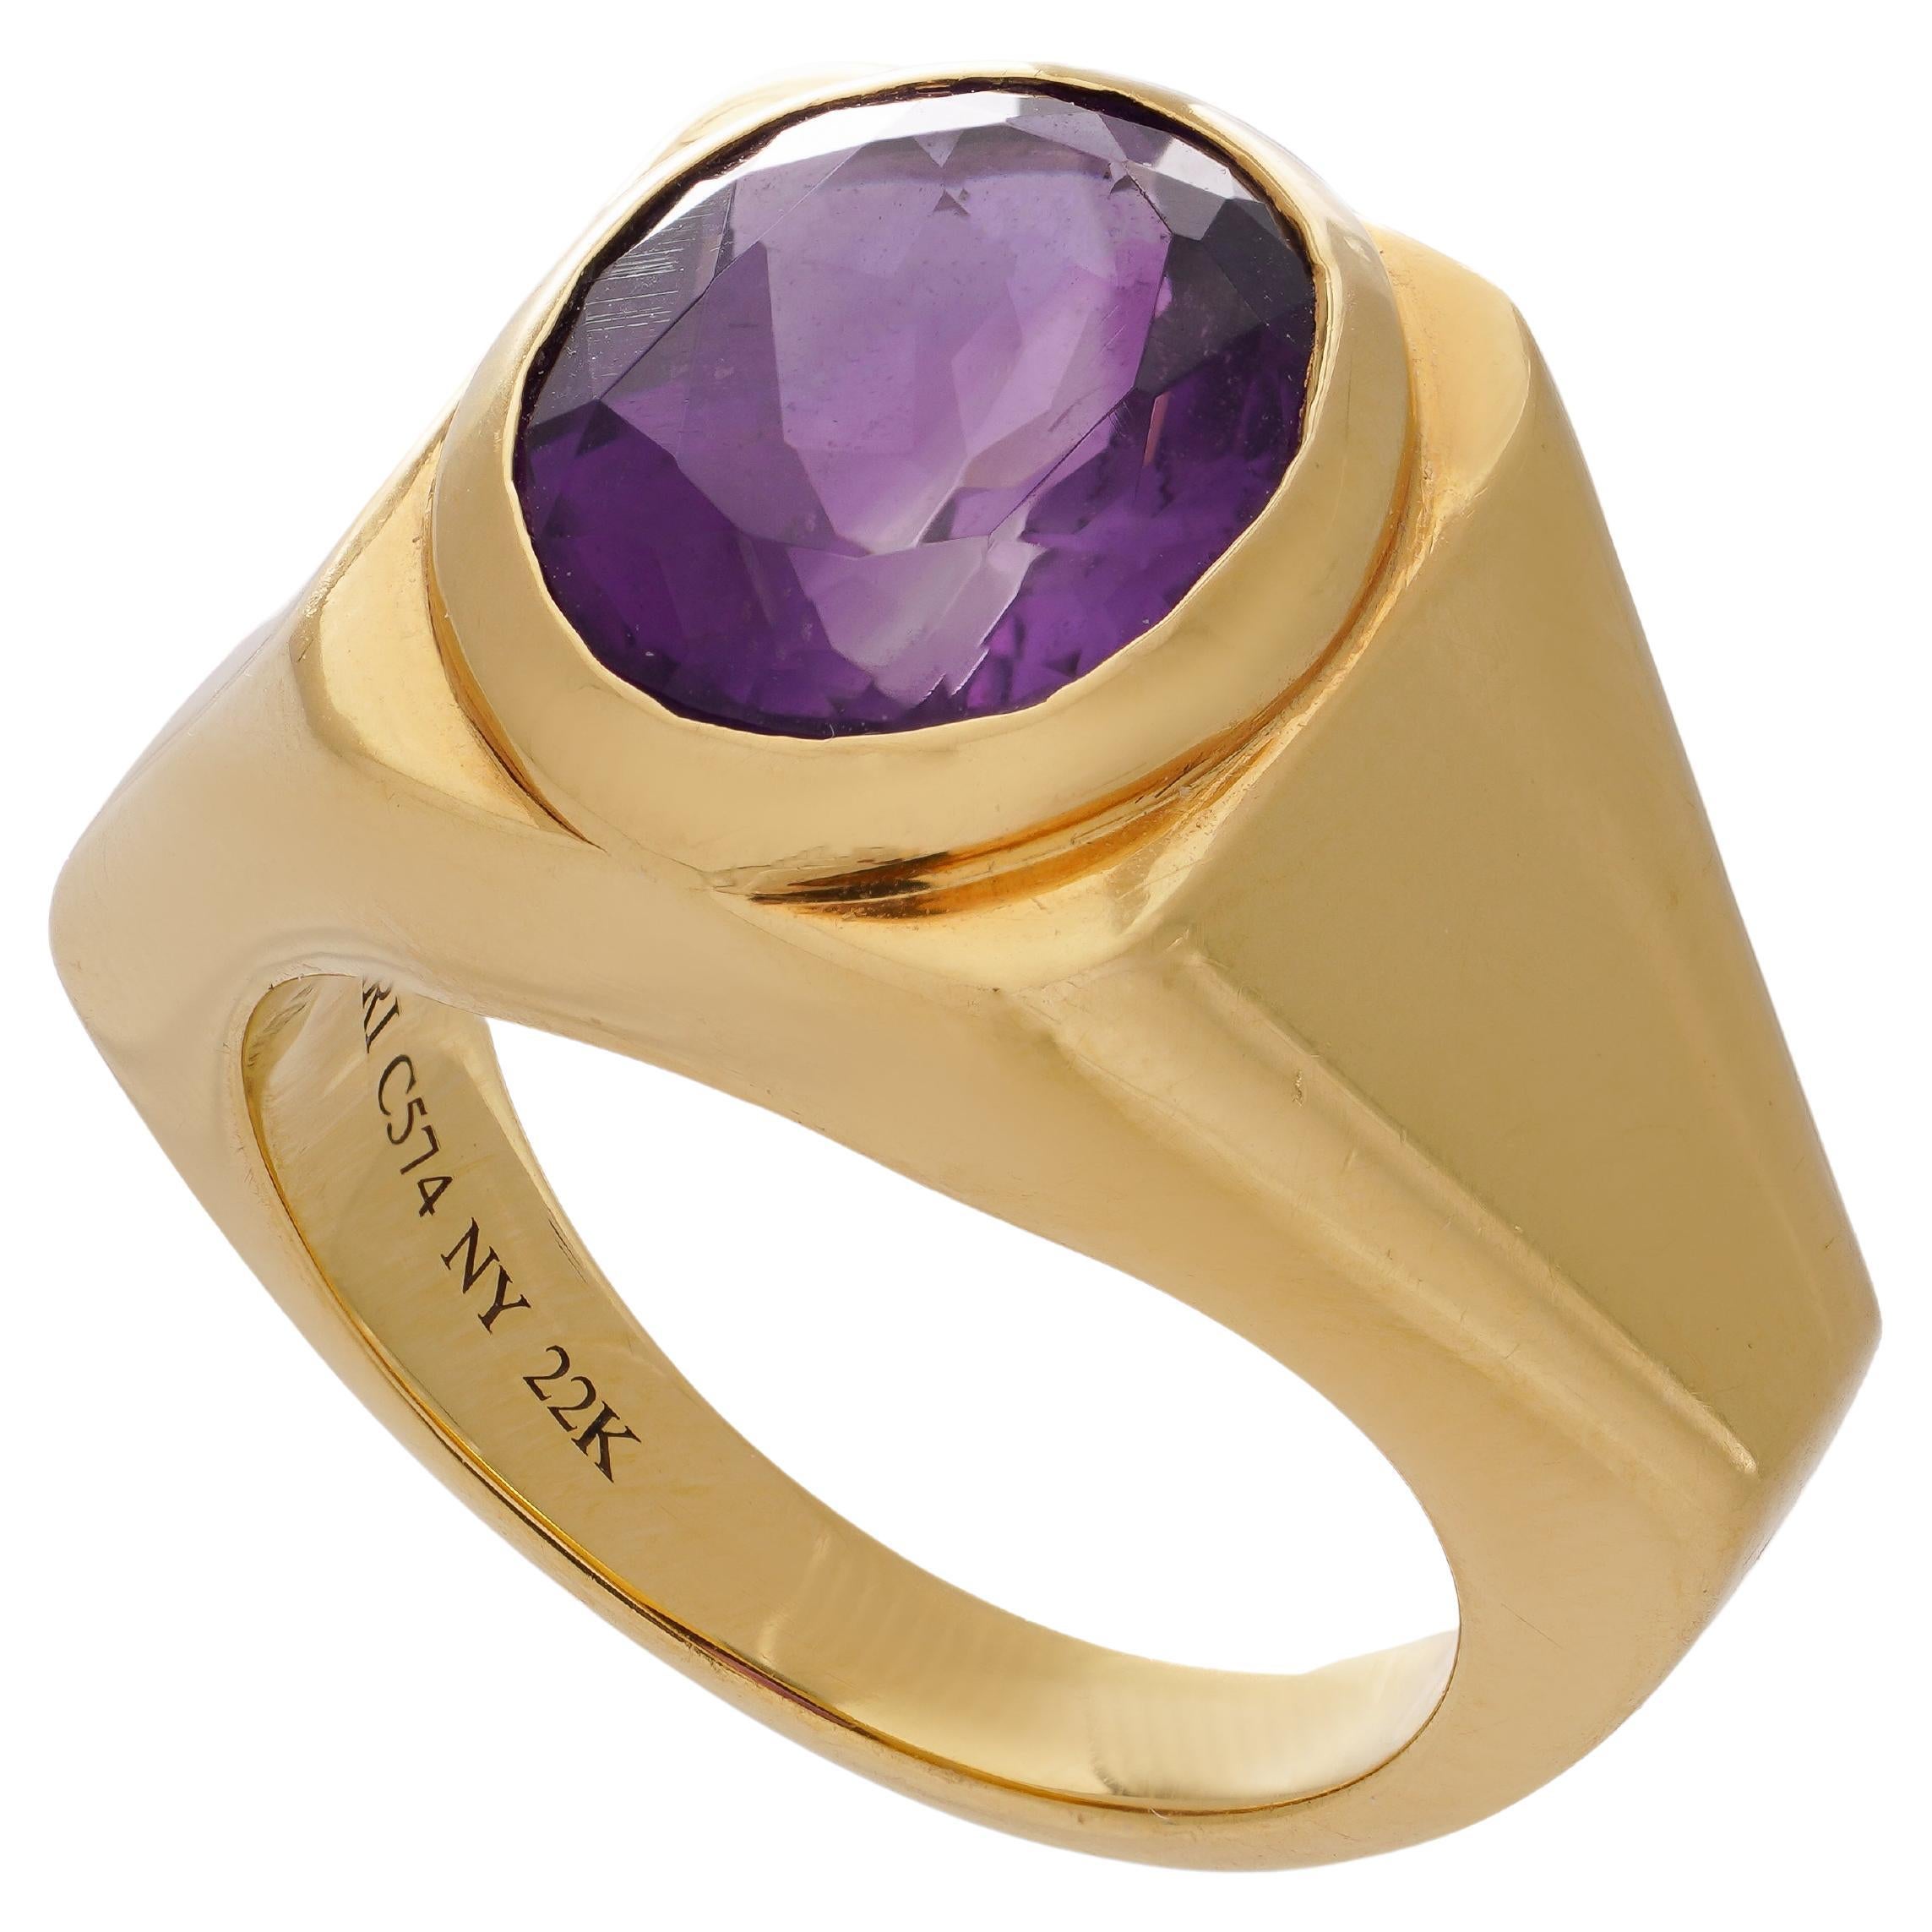 Bvlgari 22kt. yellow gold geometric band ring set with an oval-cut amethyst For Sale